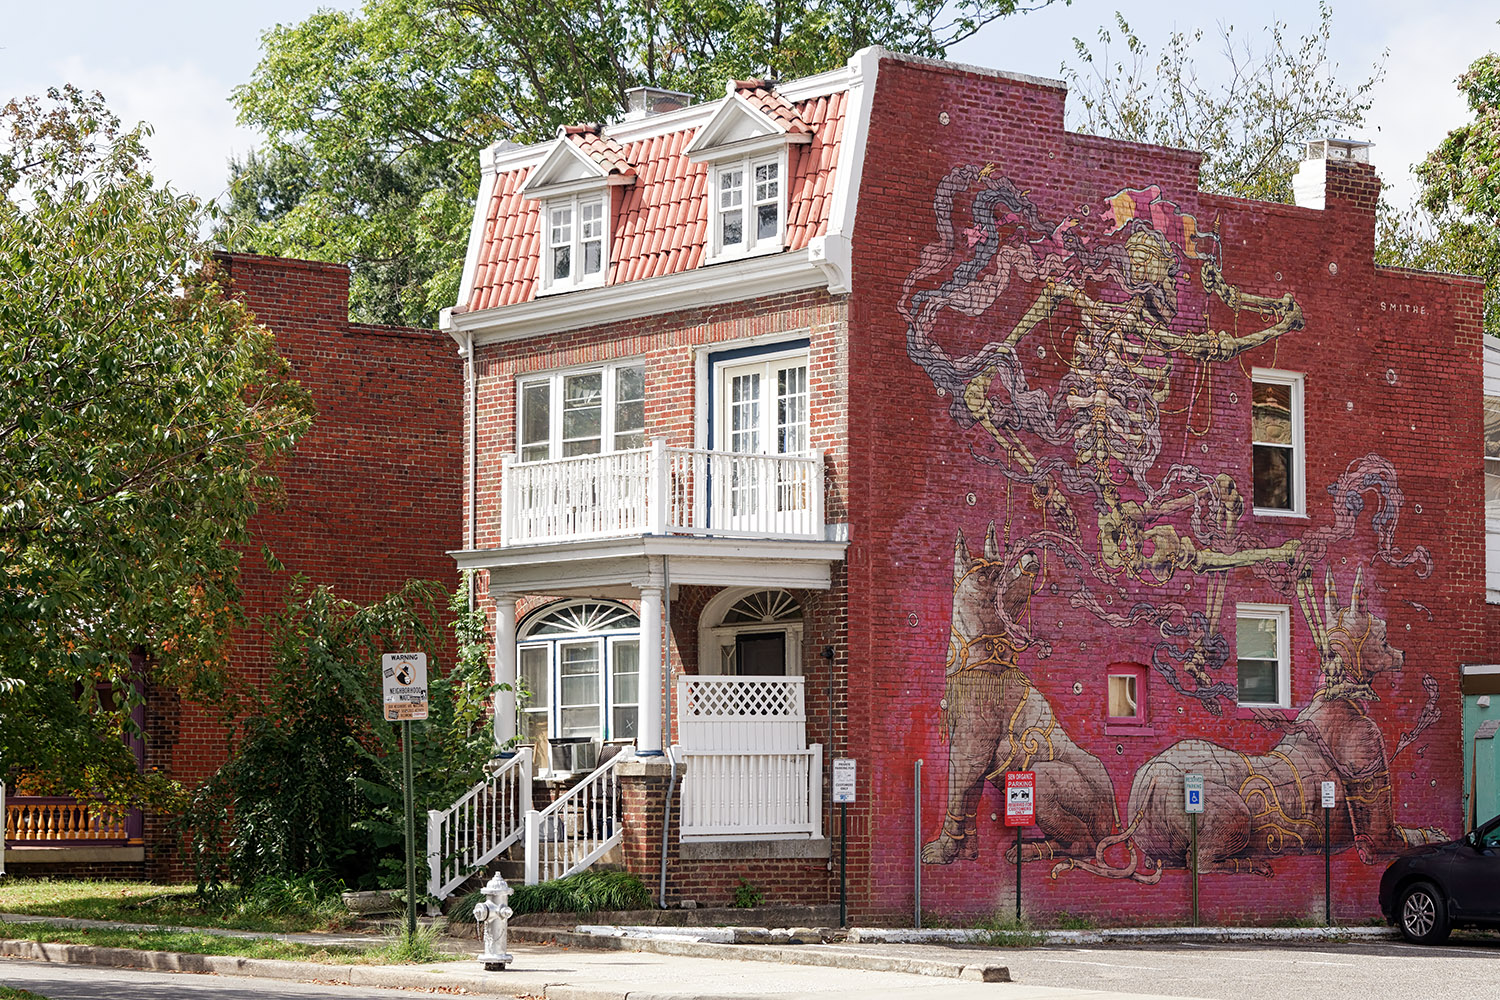 Mural on South Colonial Avenue